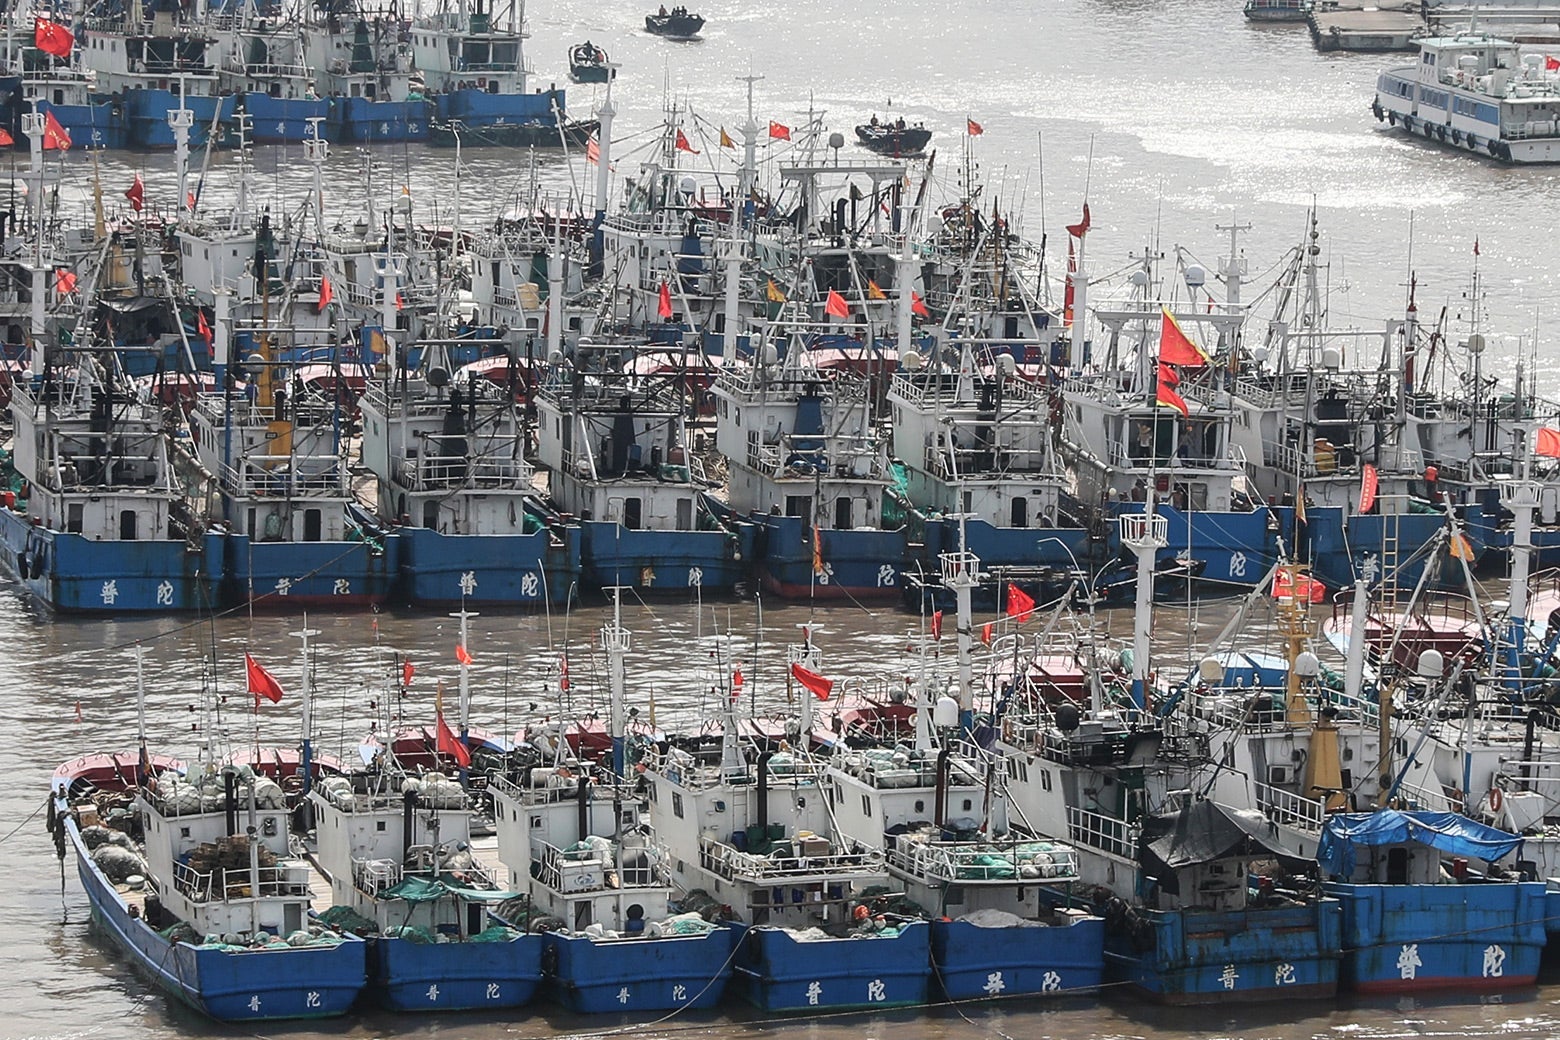 Many blue and white boats side by side with Chinese flags.